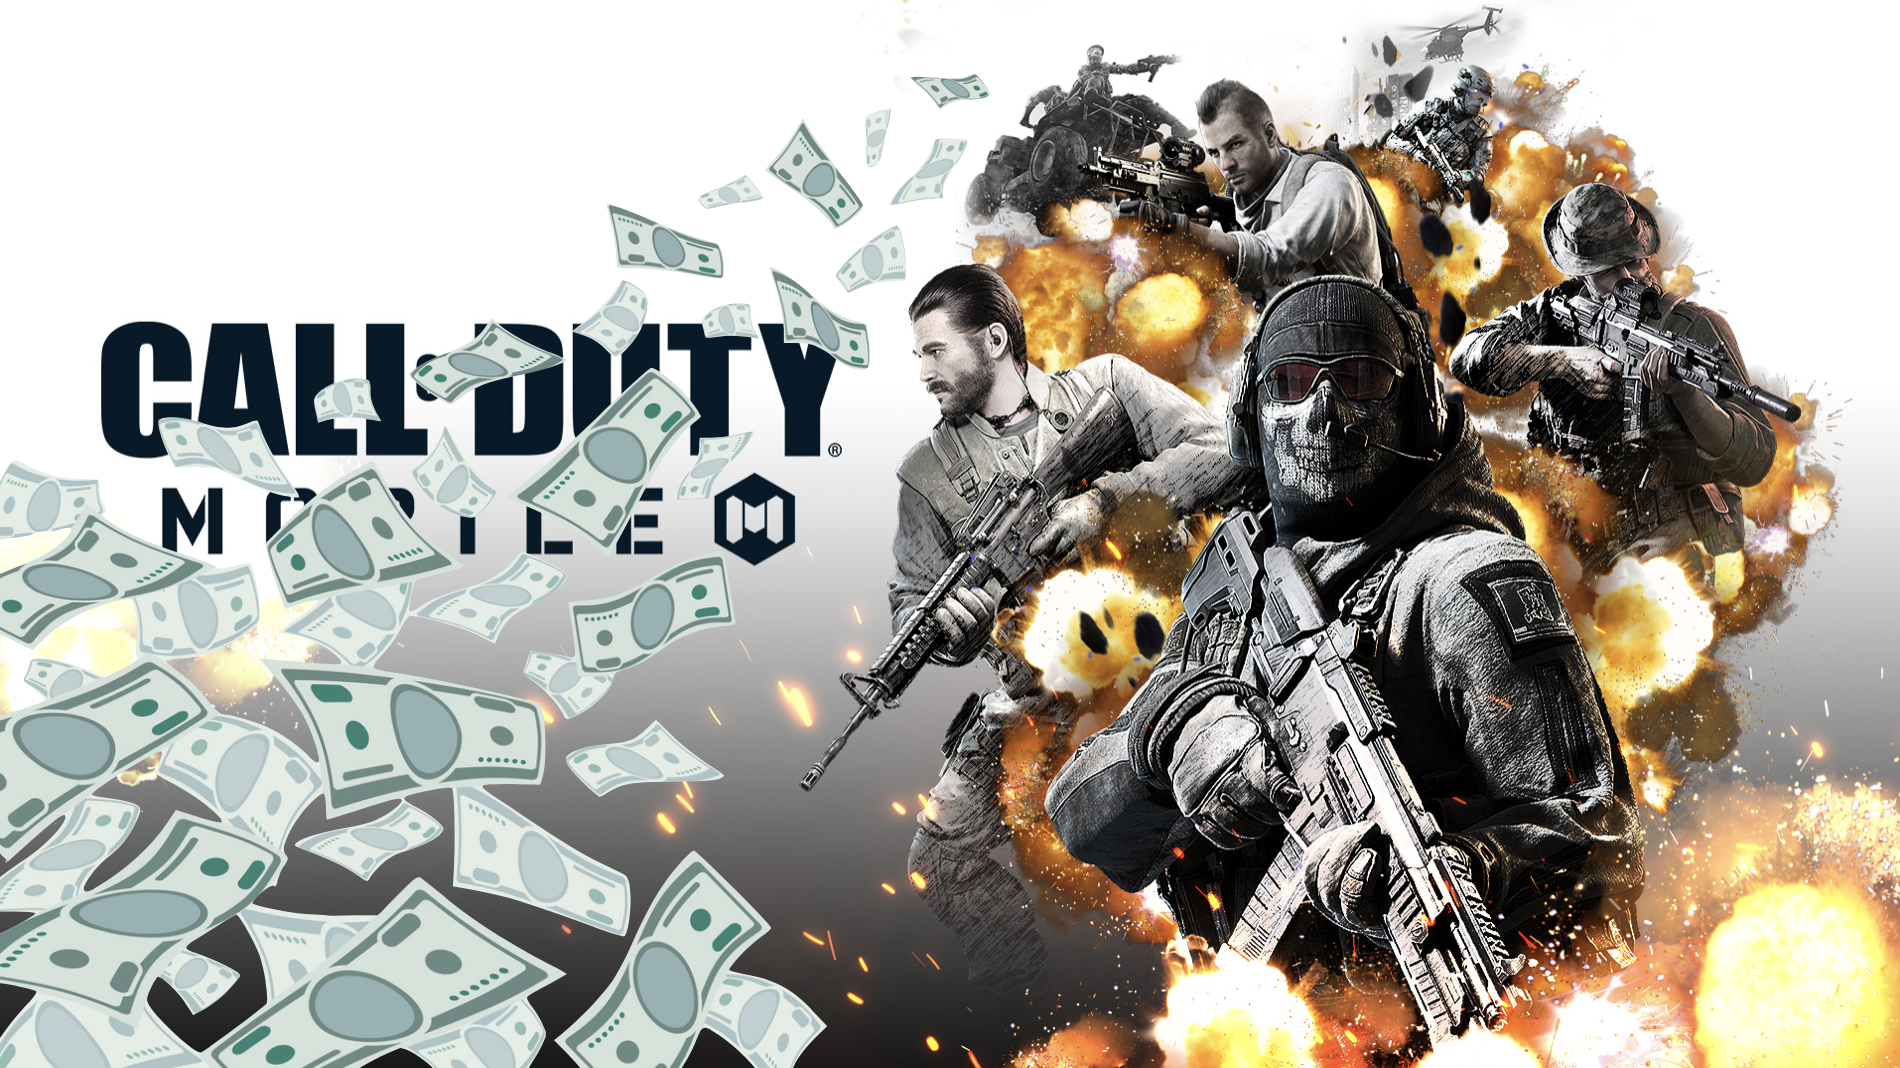 Army Men Rts Rip Multiplayer Guide money hack